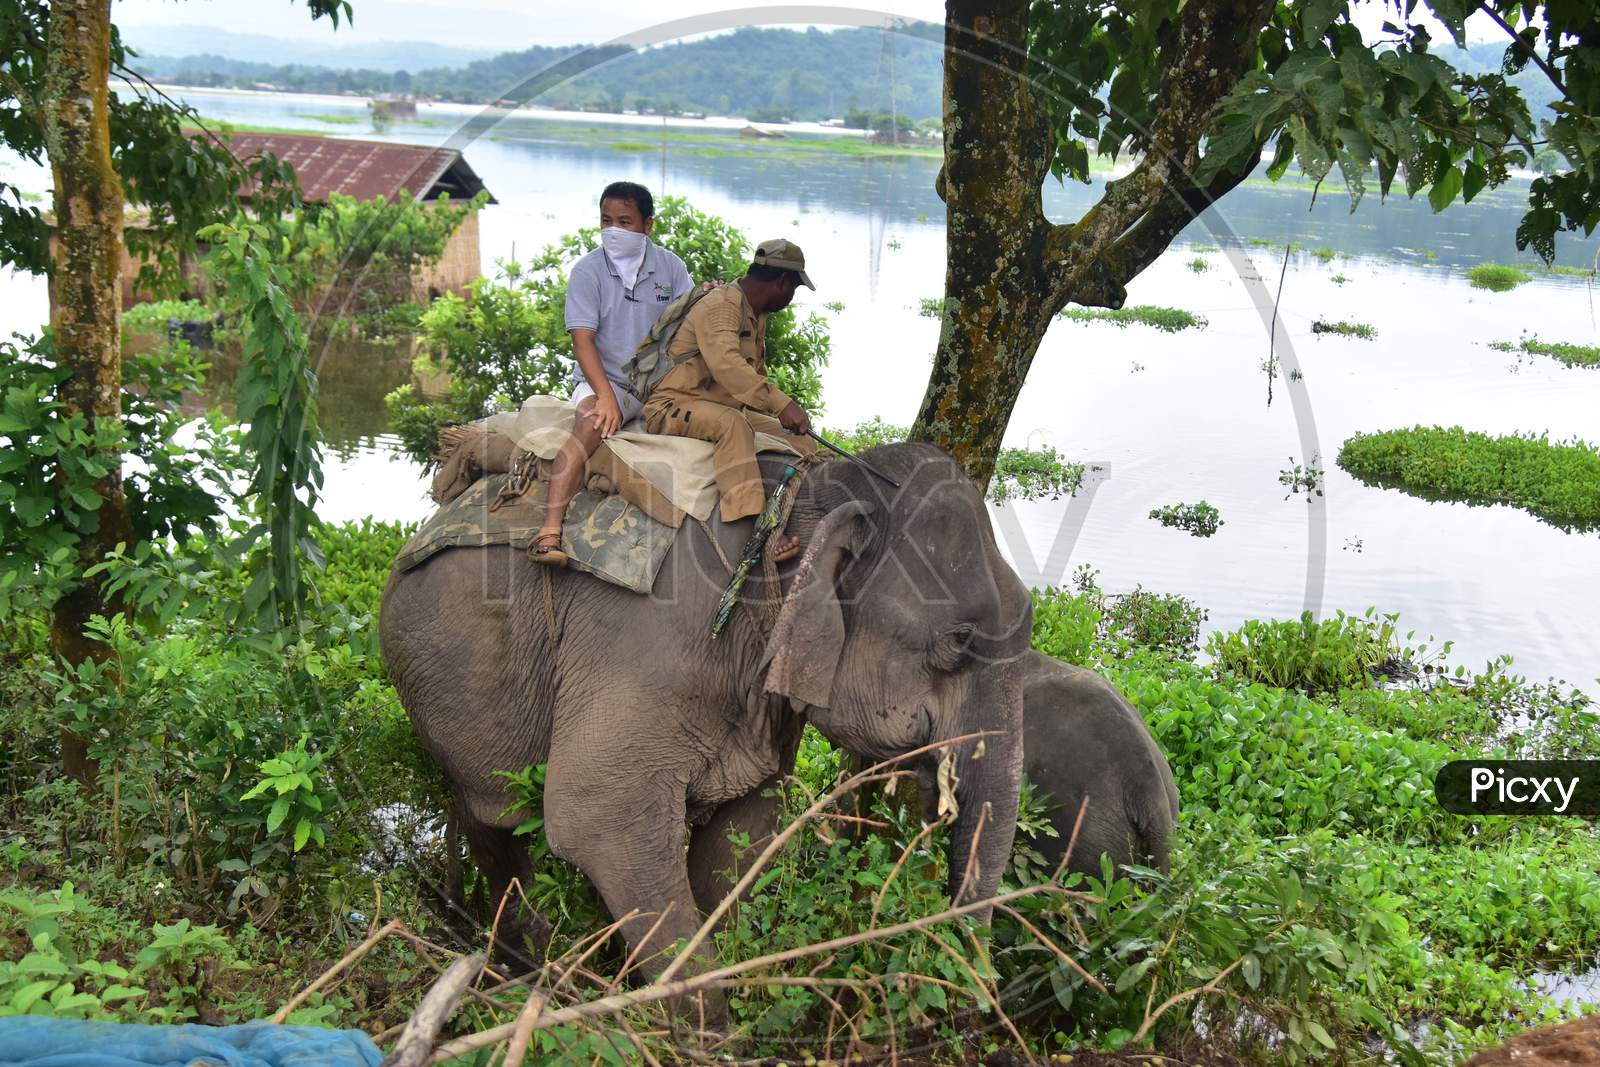 Forest officials use elephants to chase a rhino which strayed off from the flood-affected areas of the Kaziranga National Park to the National Highway 37 in Nagaon, Assam on July 18, 2020